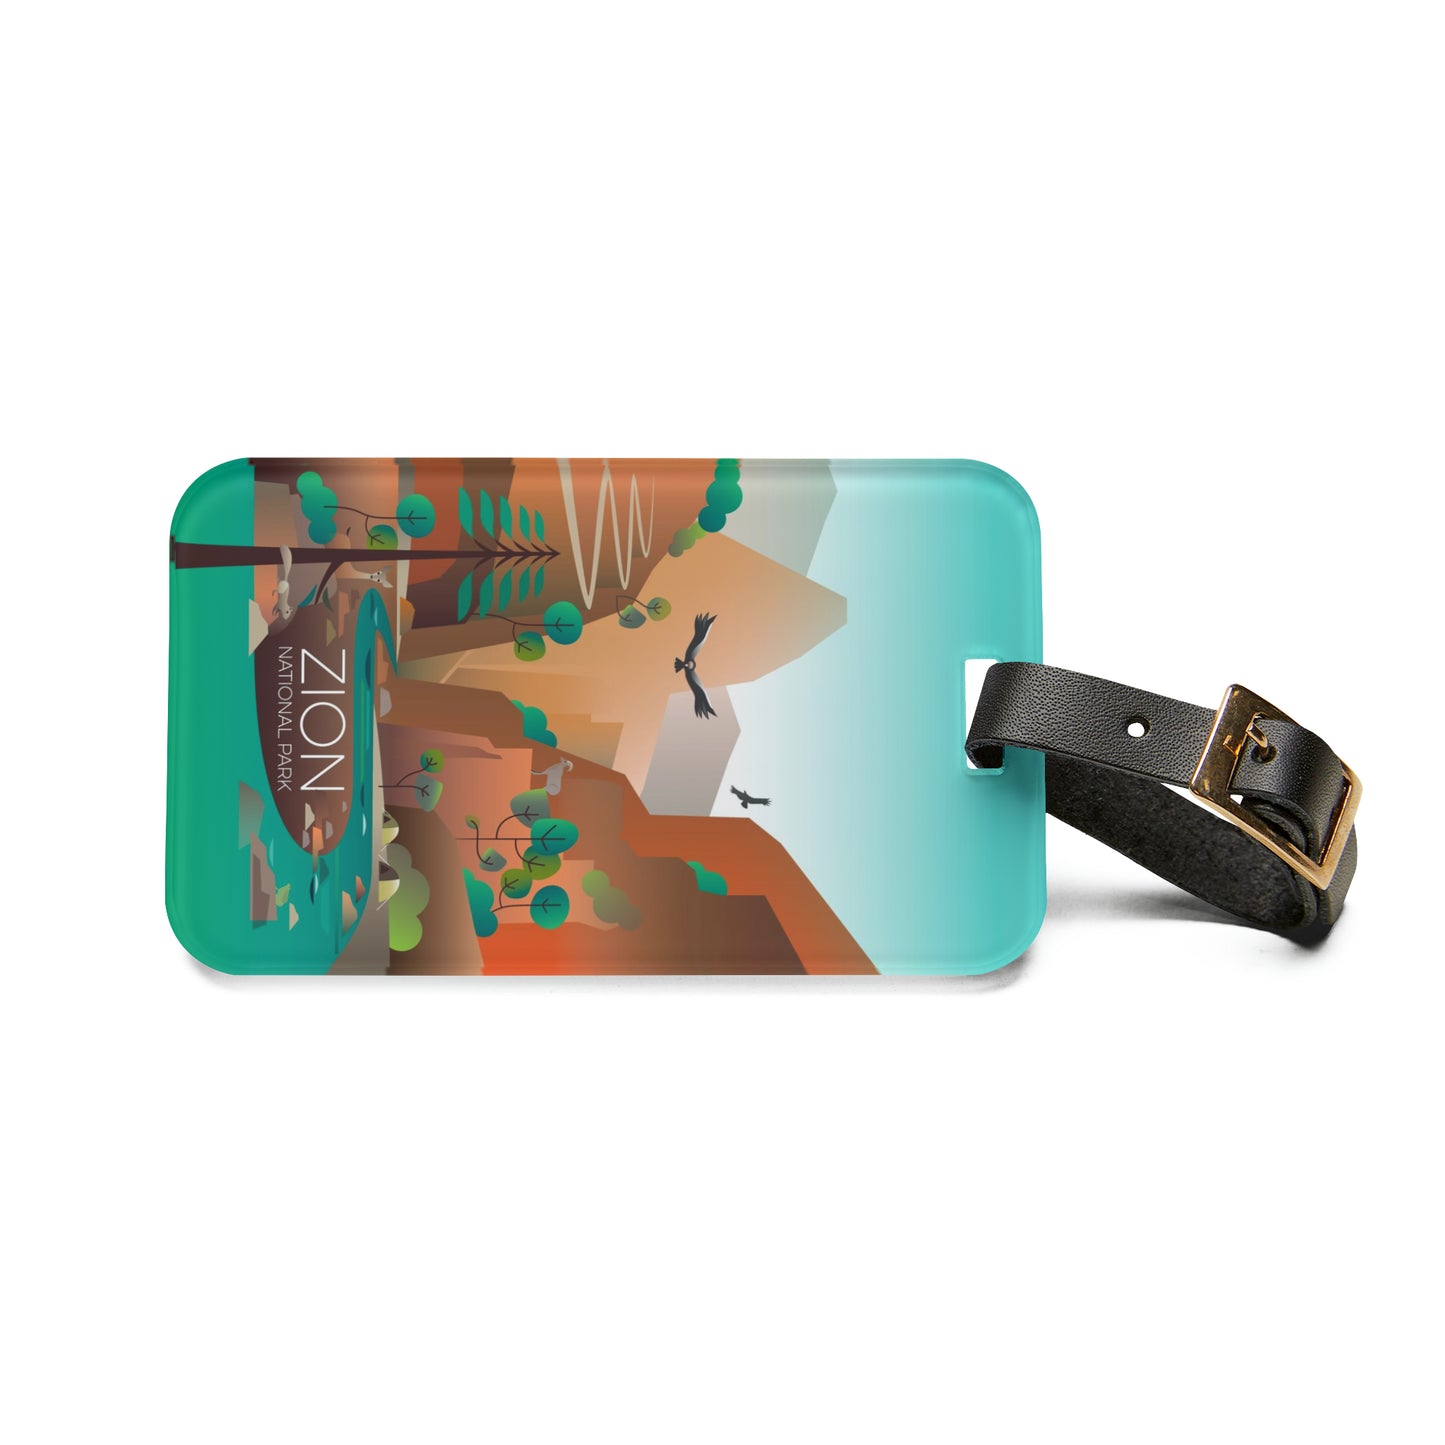 Zion National Park Luggage Tag